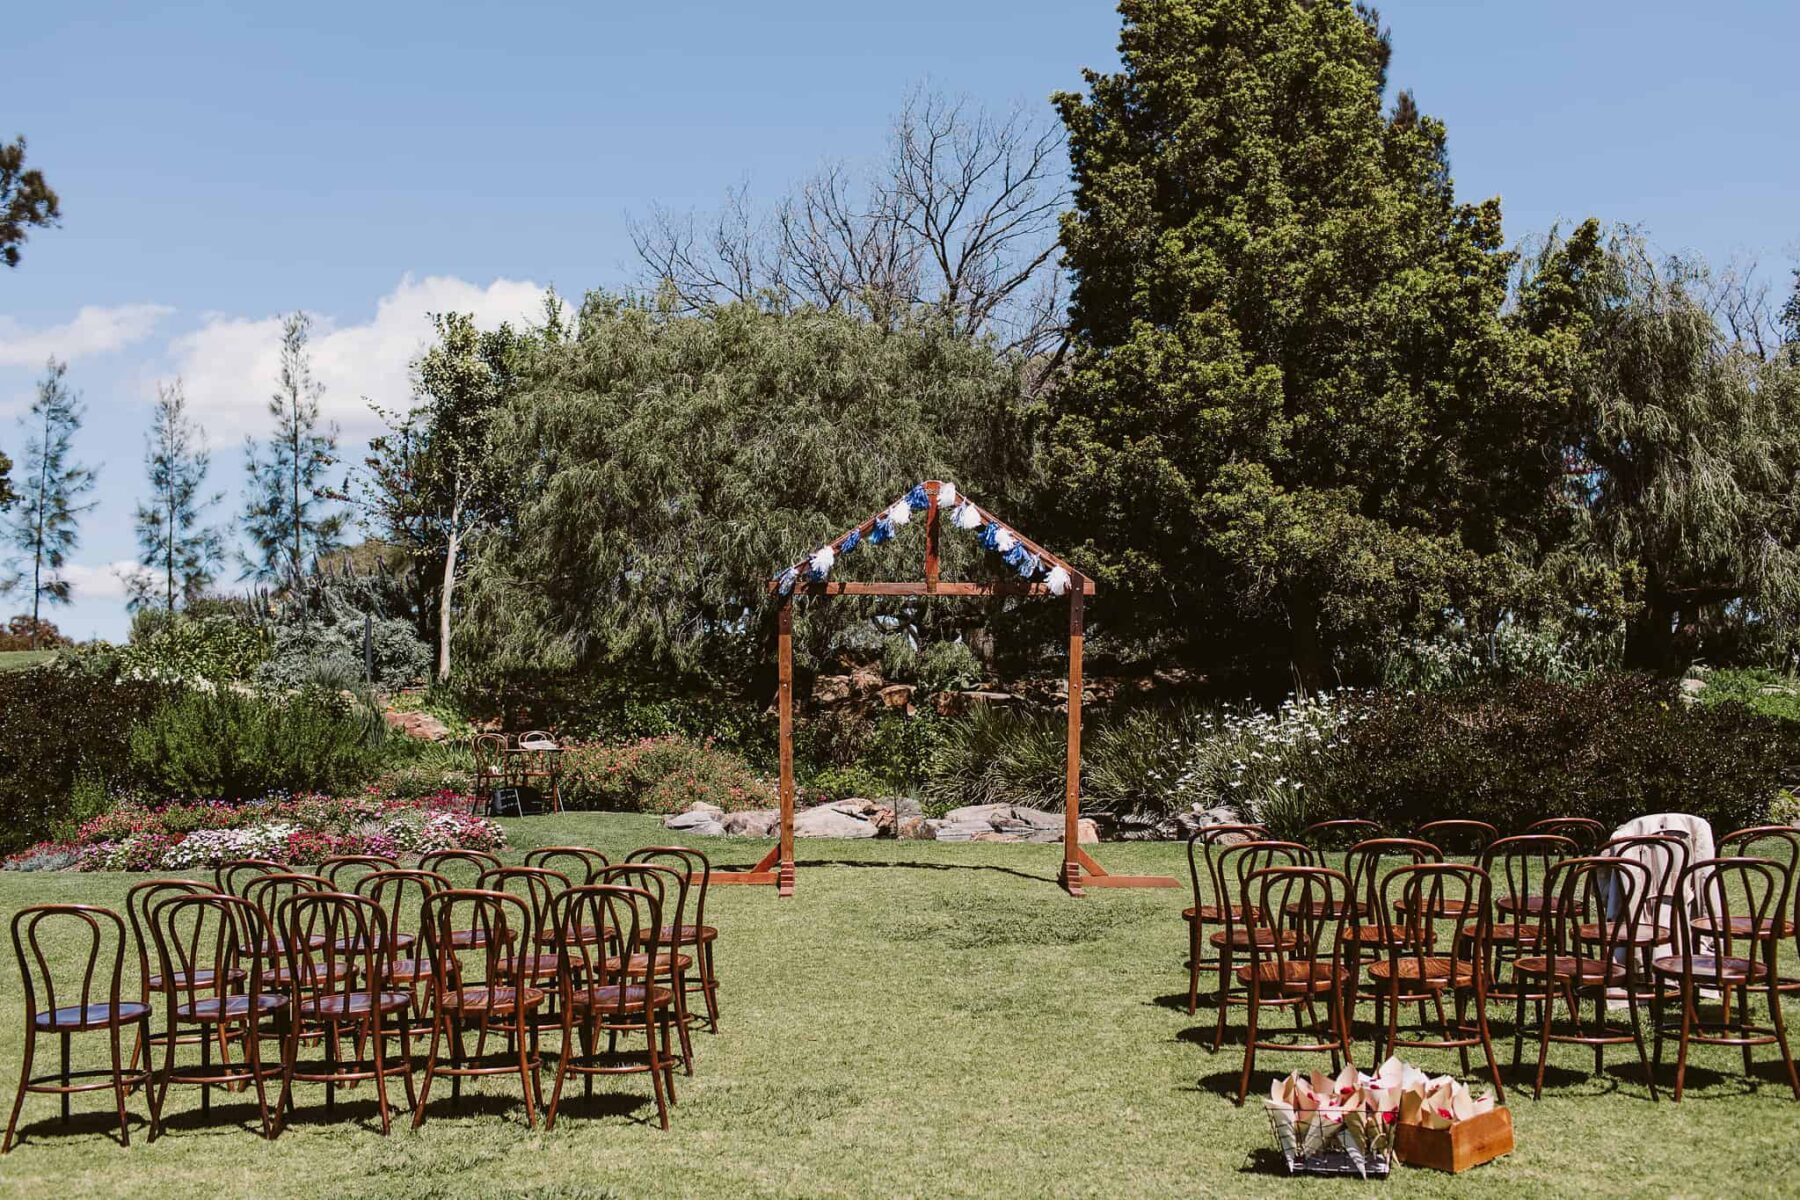 Adelaide wedding in the Veale Gardens